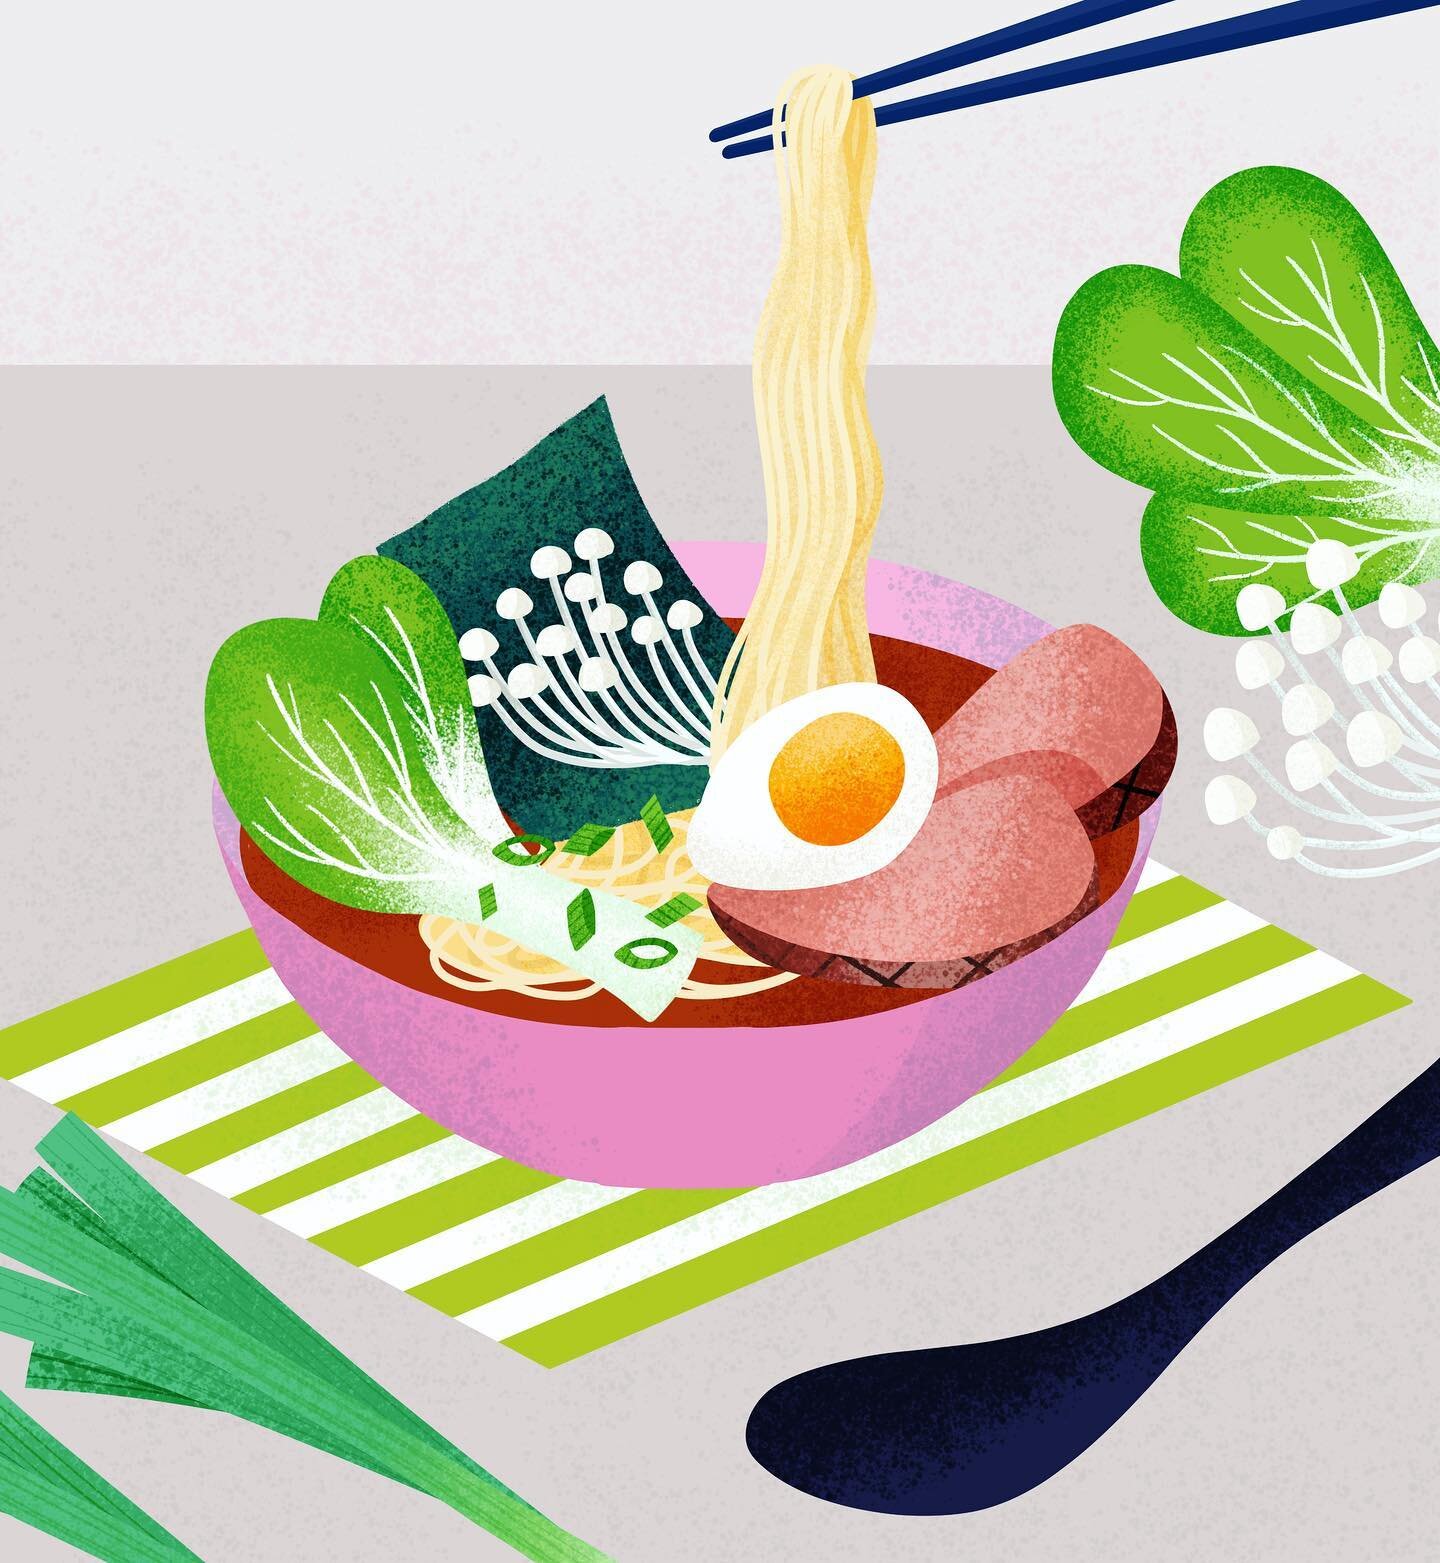 ⁣Ramen! 🍜 ⠀
⠀
One of my favourite pieces from The Little Book of Sushi - the book I illustrated for @sushidaily ⠀
⠀
Big thanks to everyone who entered my giveaway - I&rsquo;ll be sharing the winners on my stories soon 👀⠀
⠀
#ramen #sushi #yum #illus